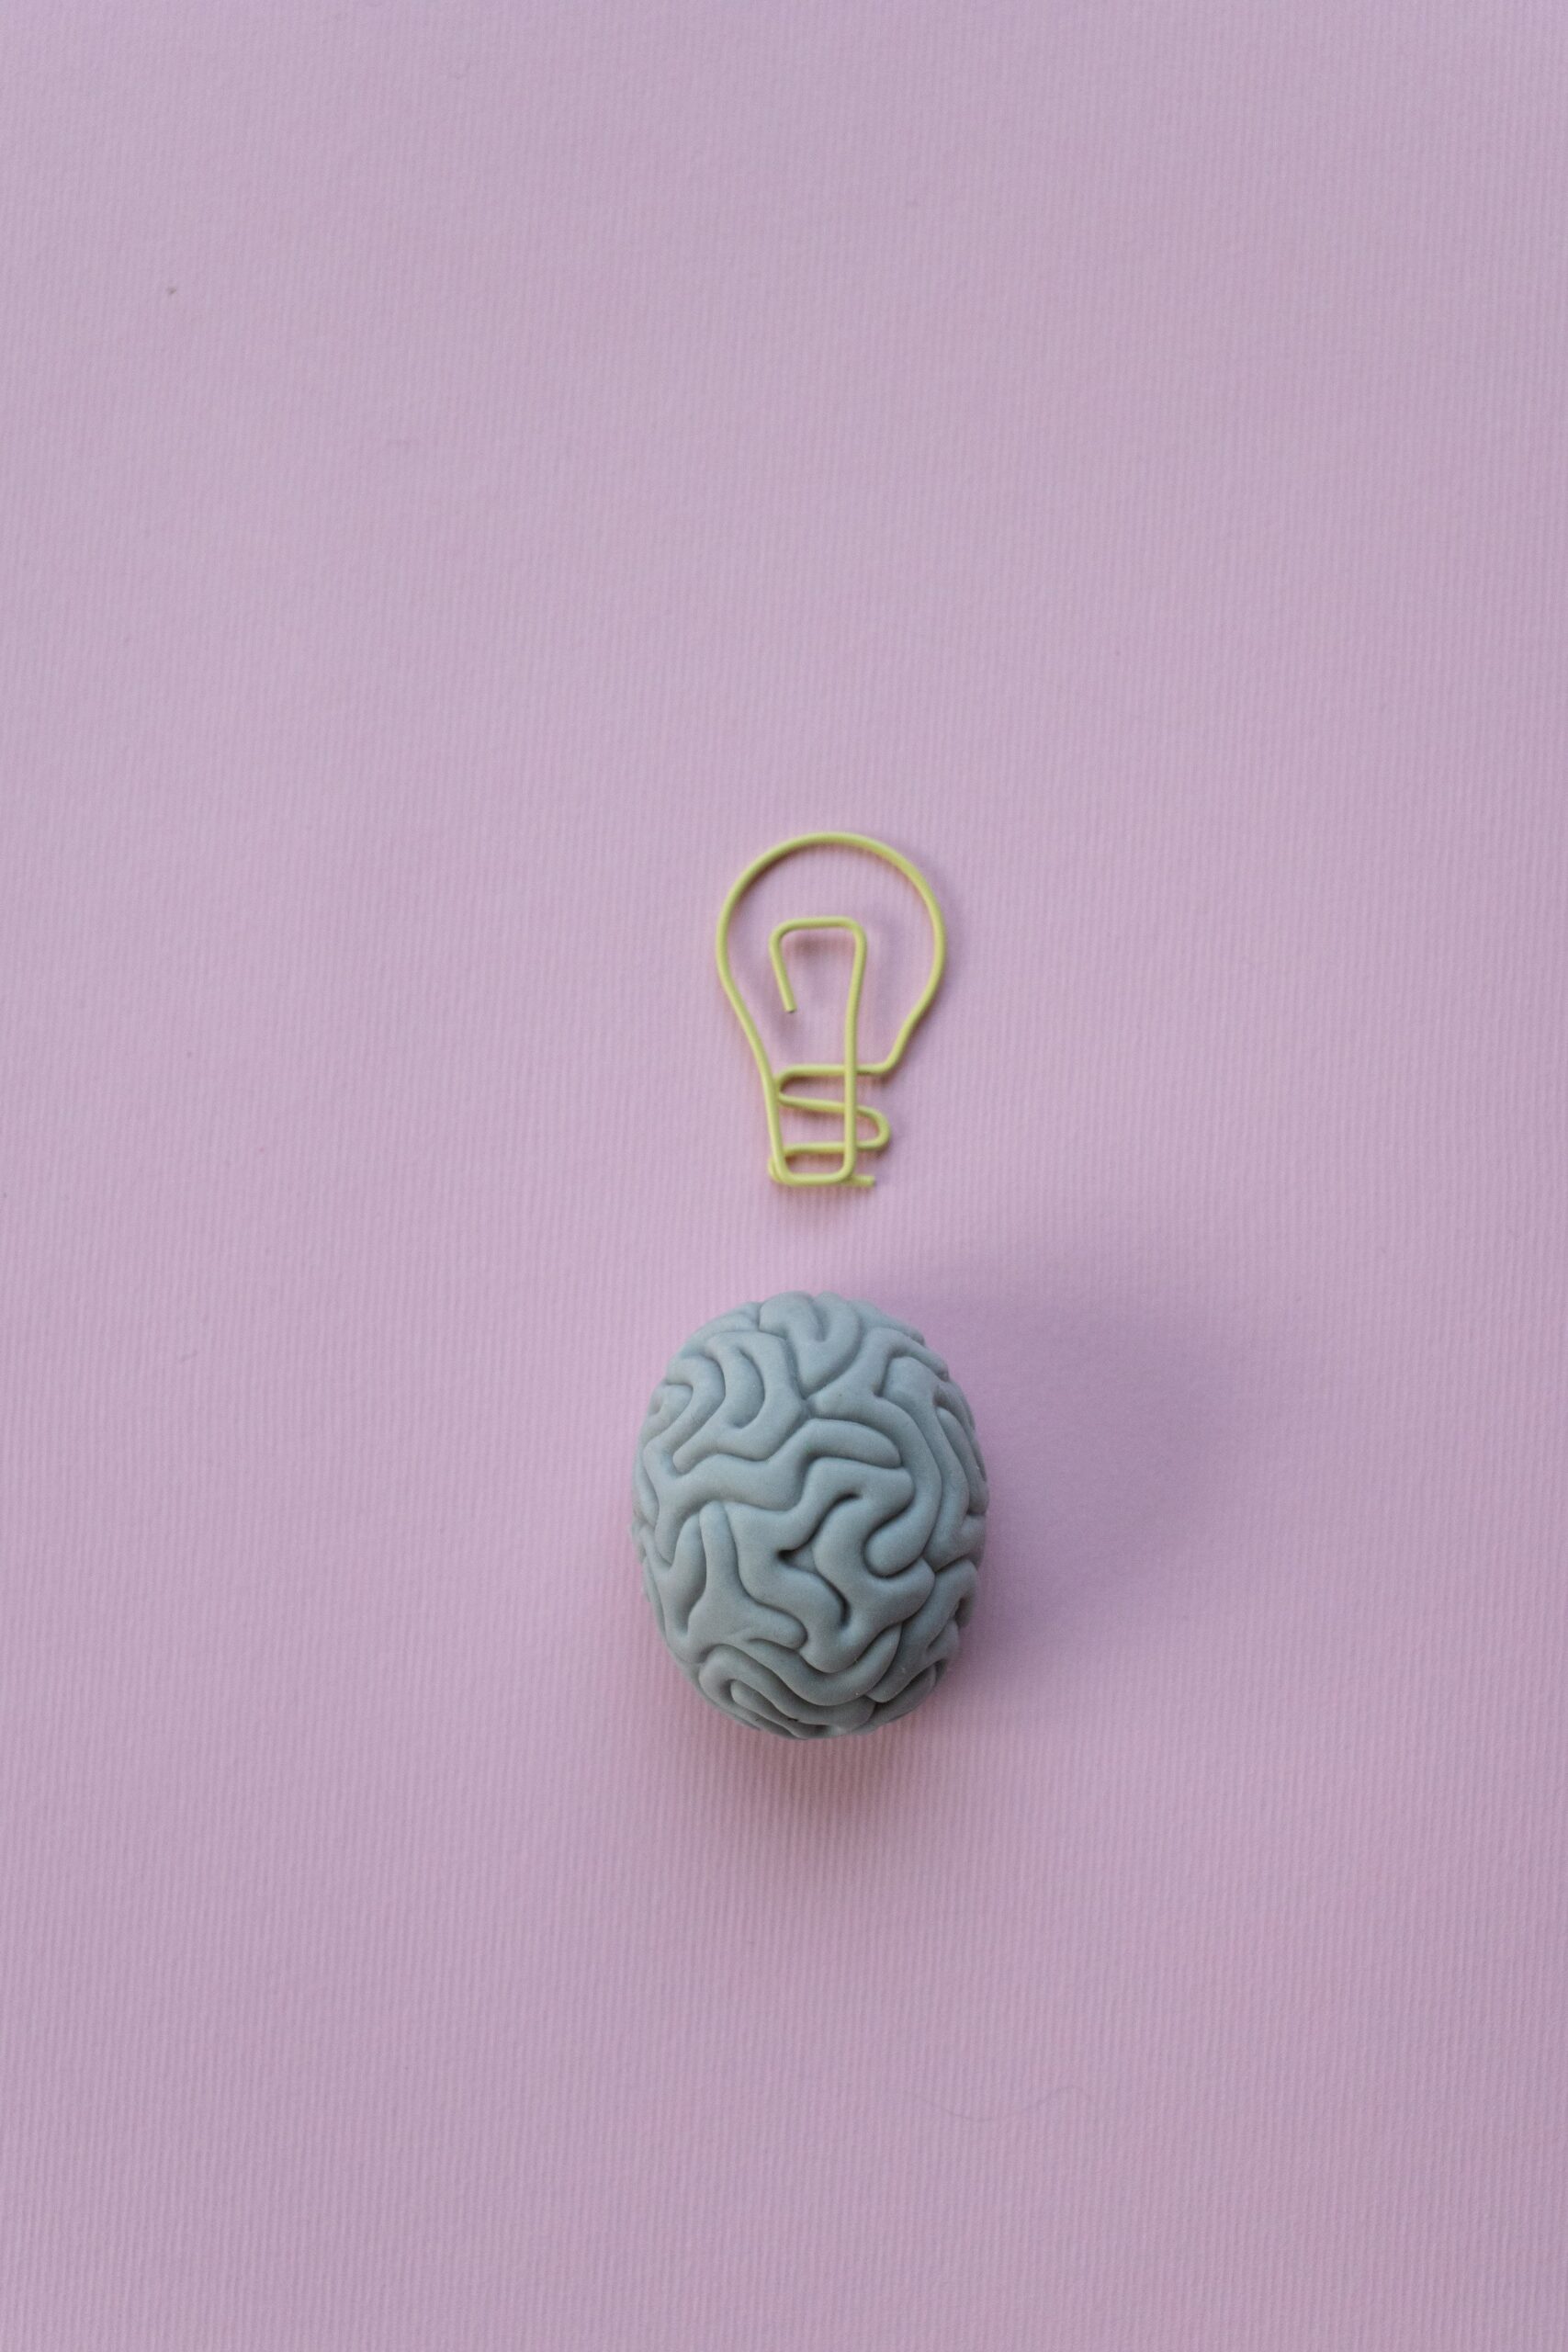 5 Powerful Brain Exercises to Unlock Your Mind’s Potential